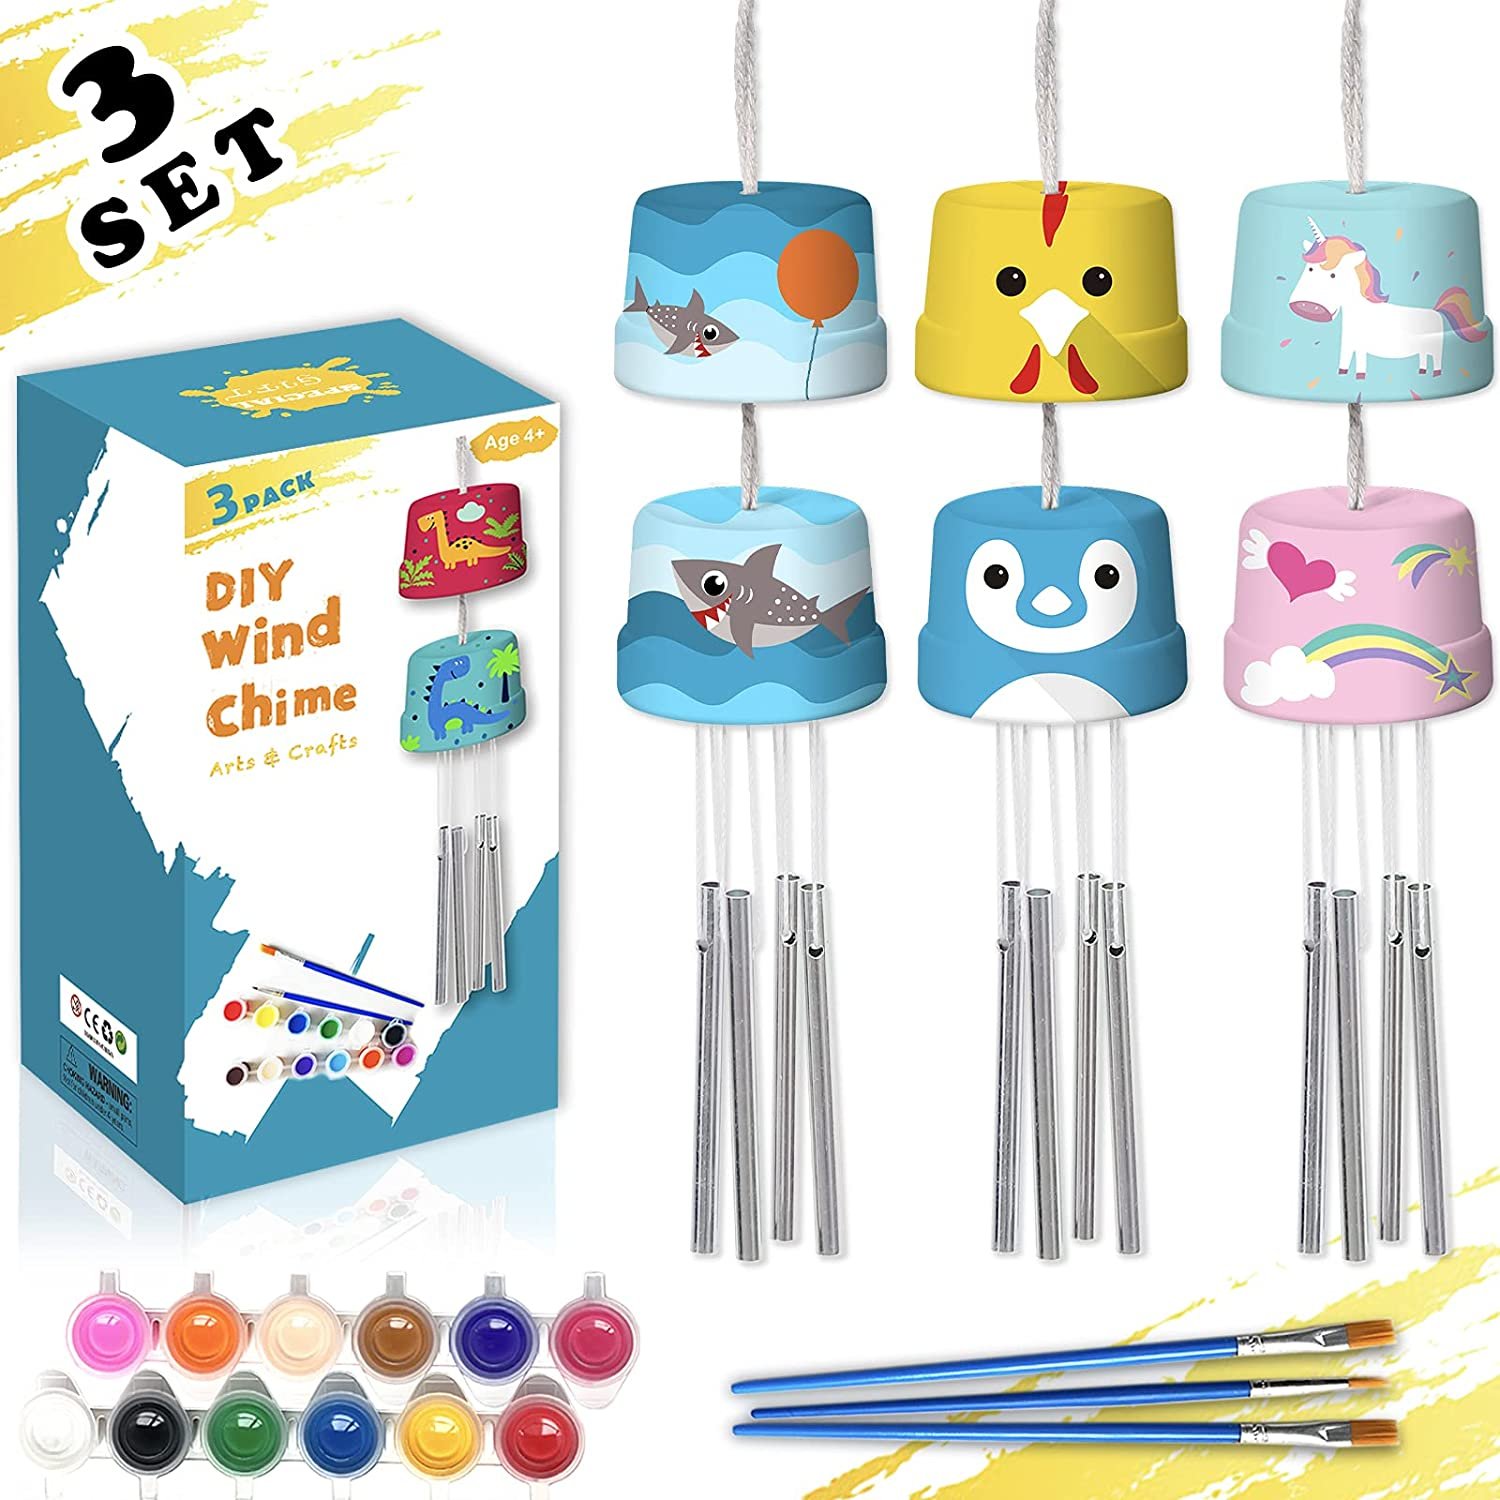 3-Pack Diy Wind Chime Kits- Arts And Crafts For Boys Girls Kids Ages 8-12 4-8 6-8 5-7 3-5